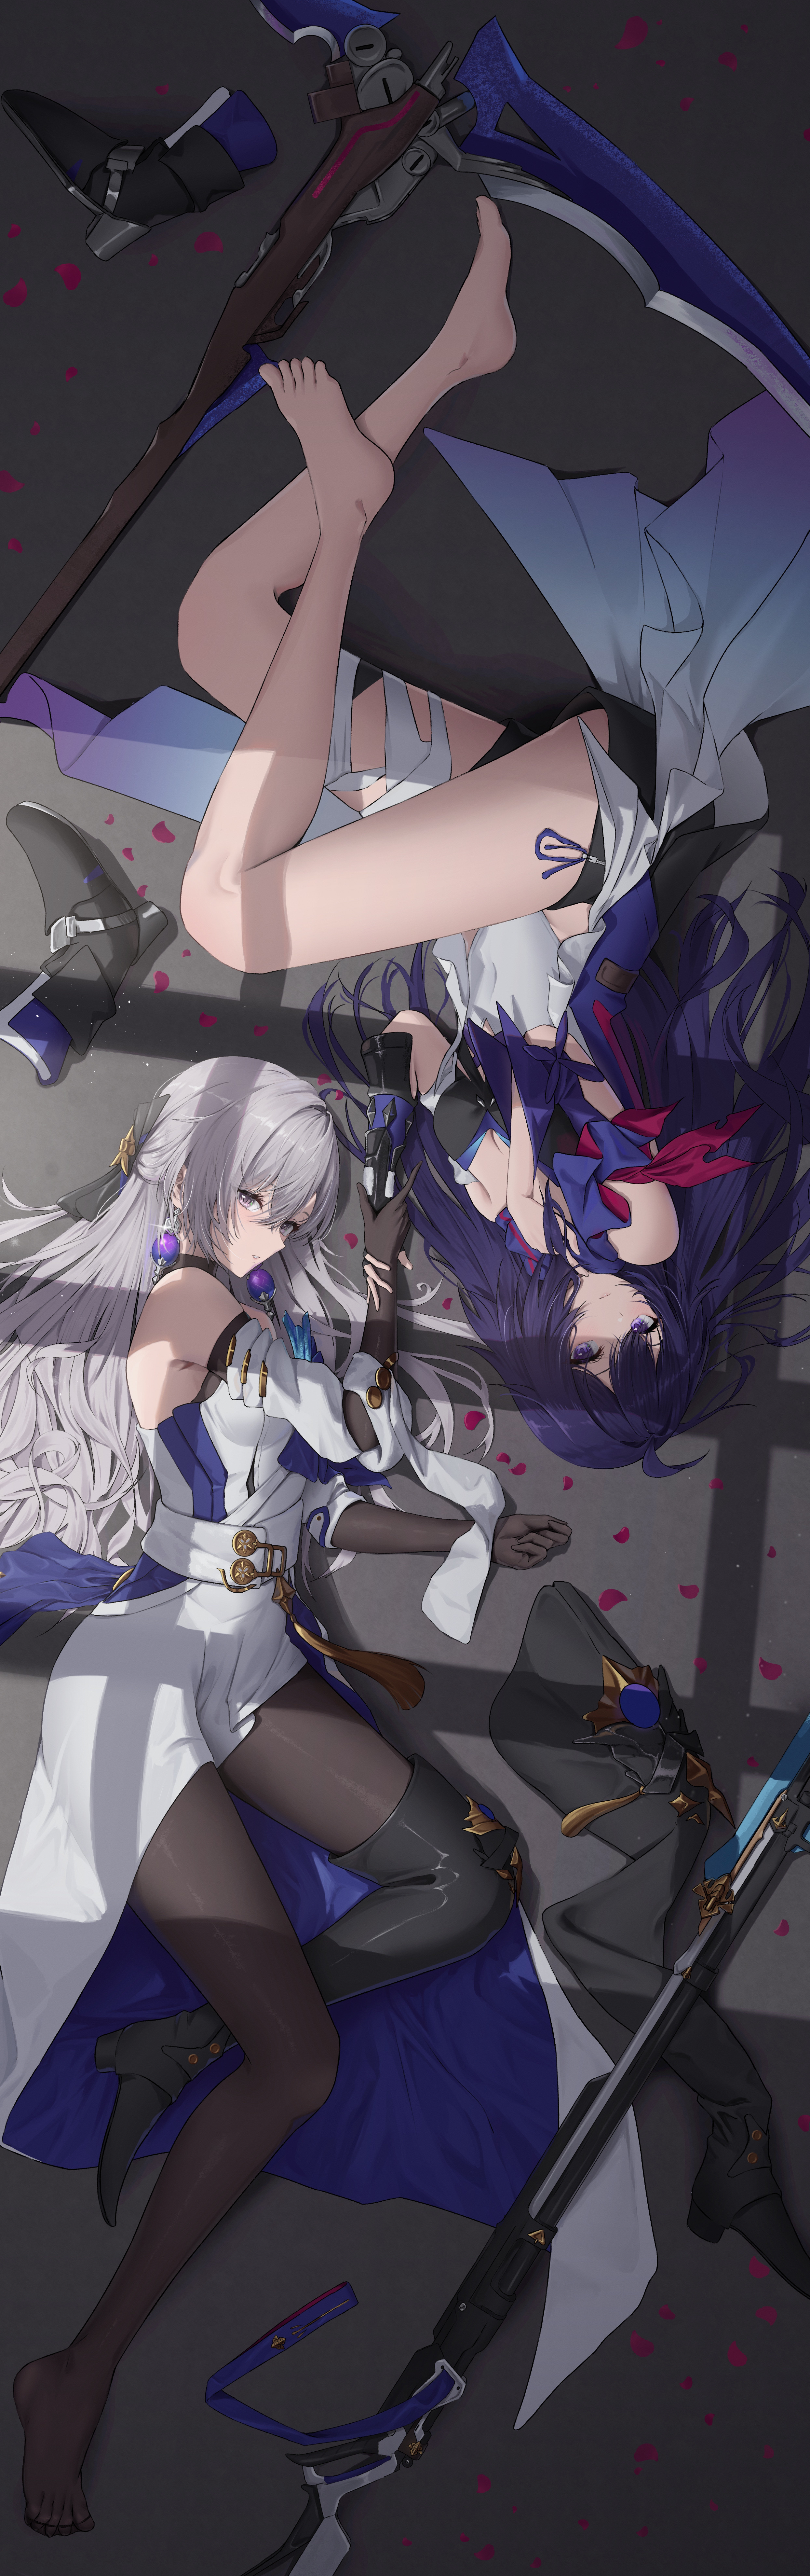 Starrail Anime Girls Lying On Side Lying Down Portrait Display Petals Scythe Weapon Looking At Viewe 2490x7914